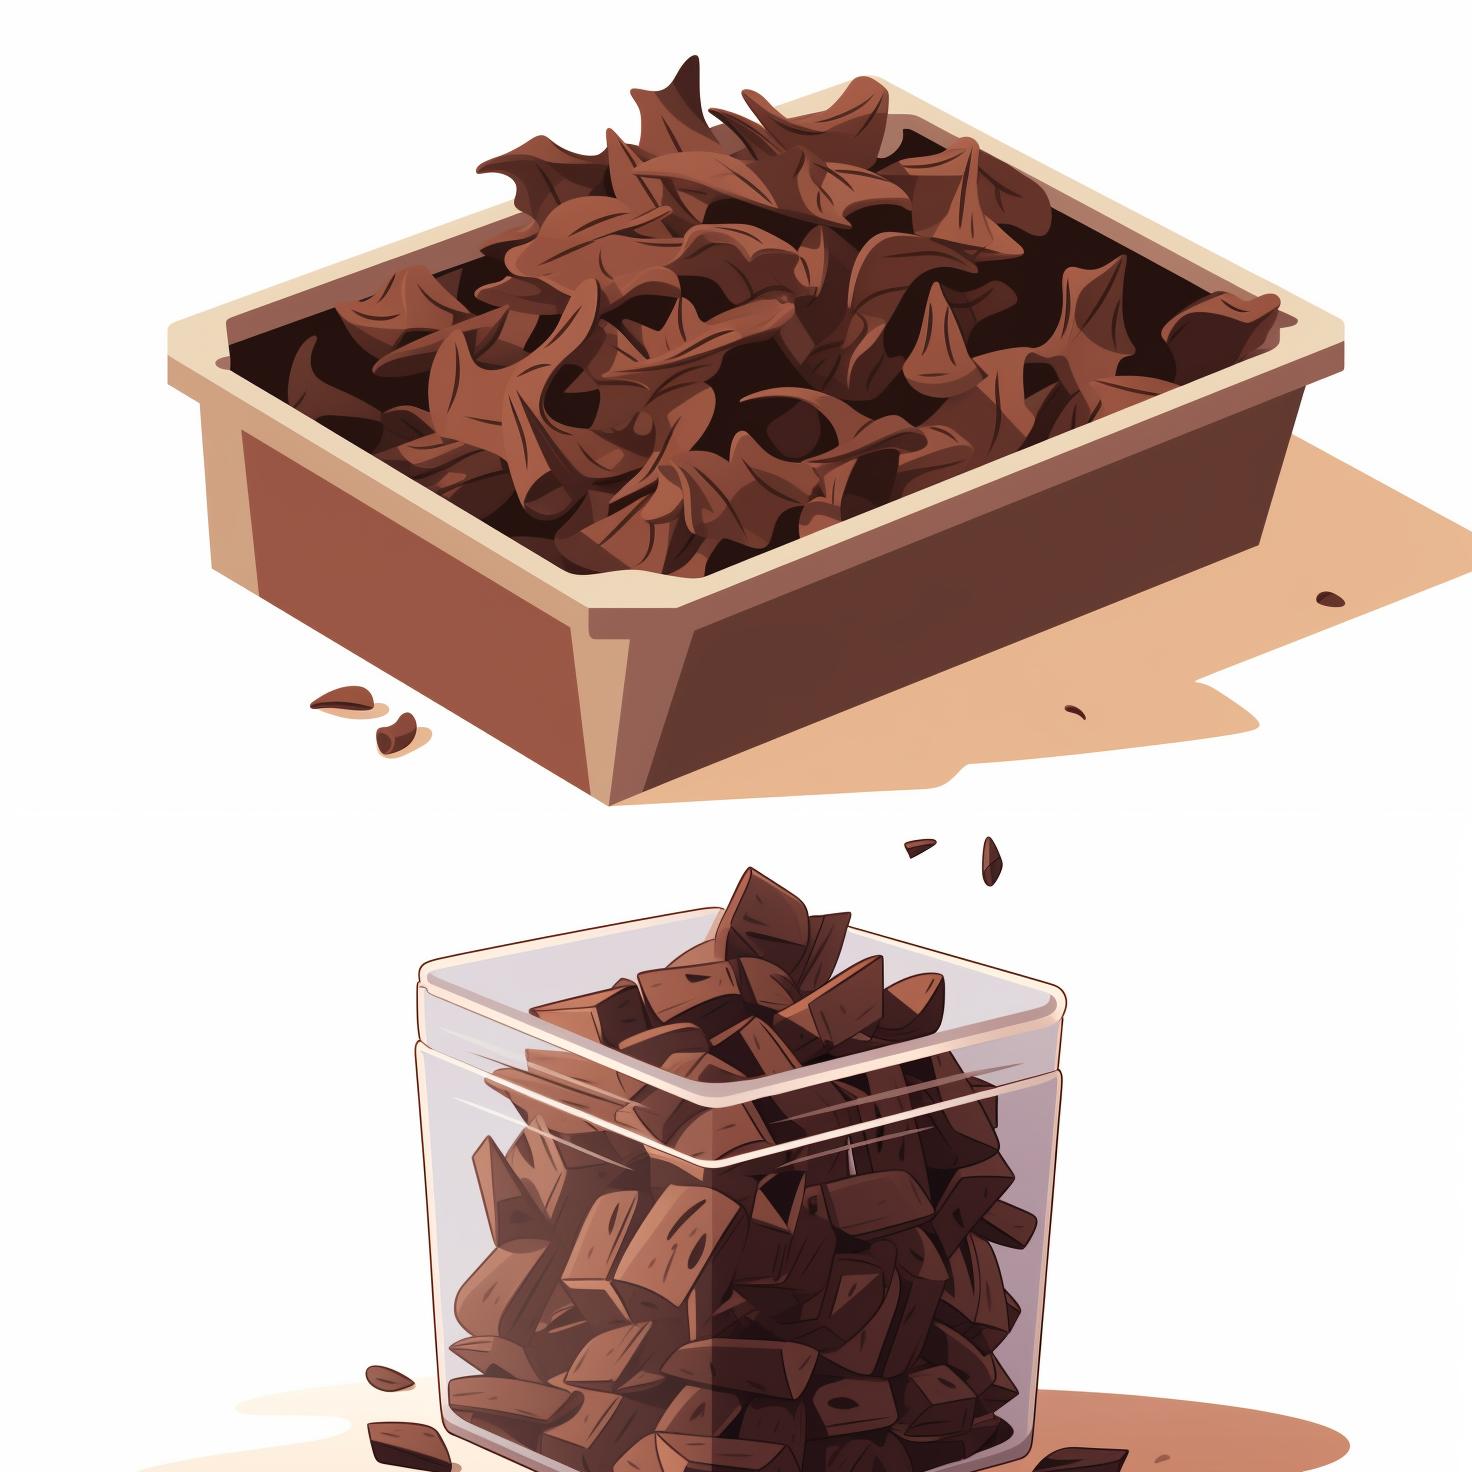 Chocolate shavings stored in a container